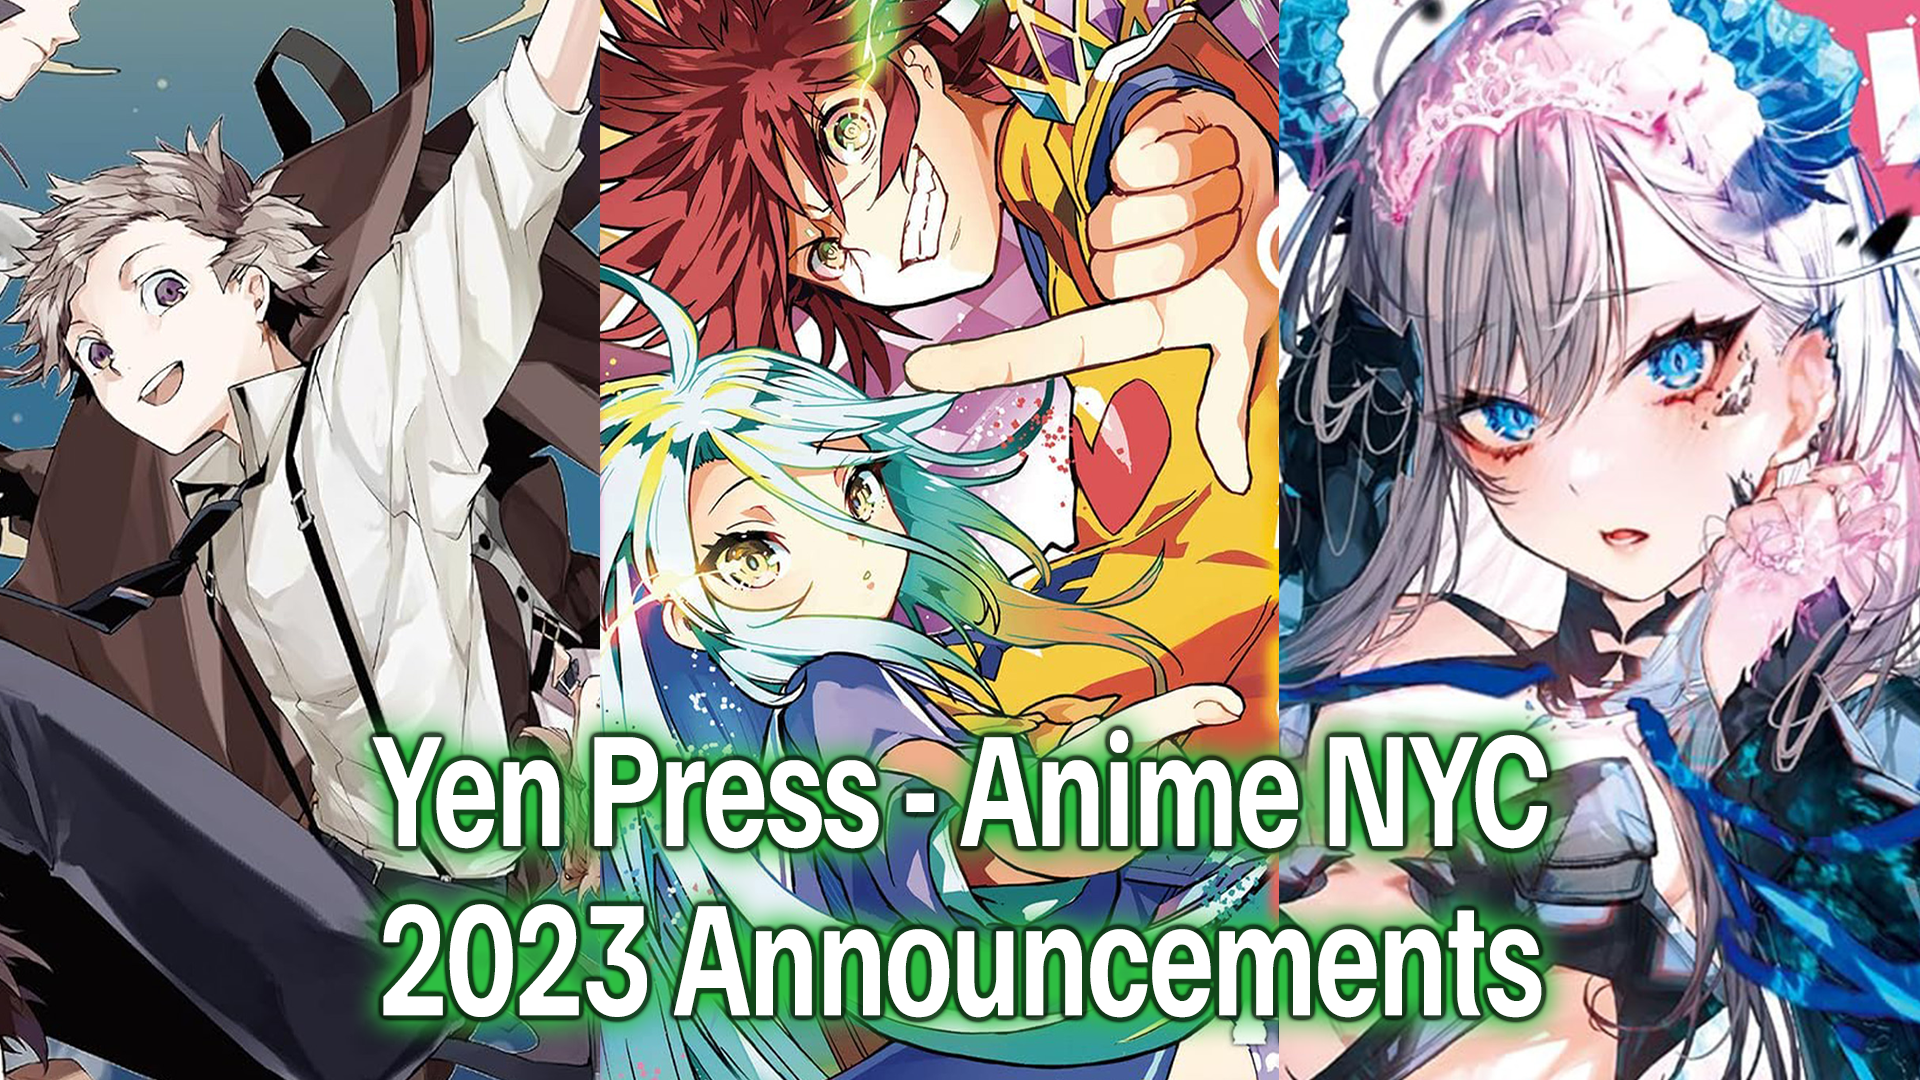 Yen Press Announces 11 New Acquisitions At Anime NYC 2023; Including Sword Art Online Re:Aincrad, Friday at the Atelier and More